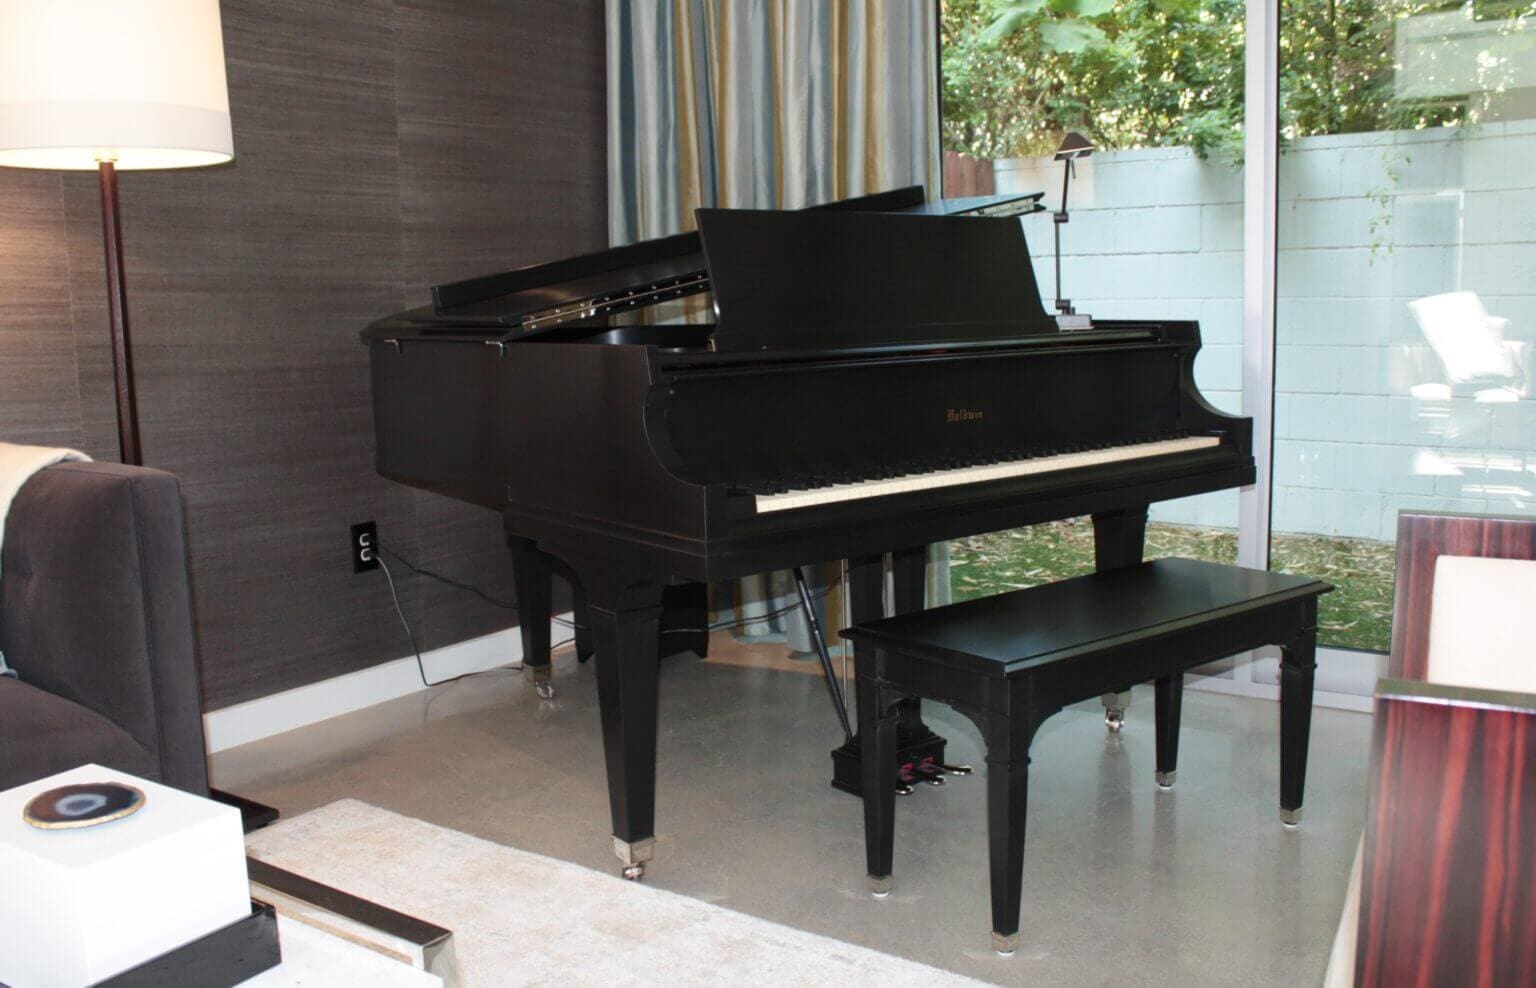 A black piano sitting in front of a window.